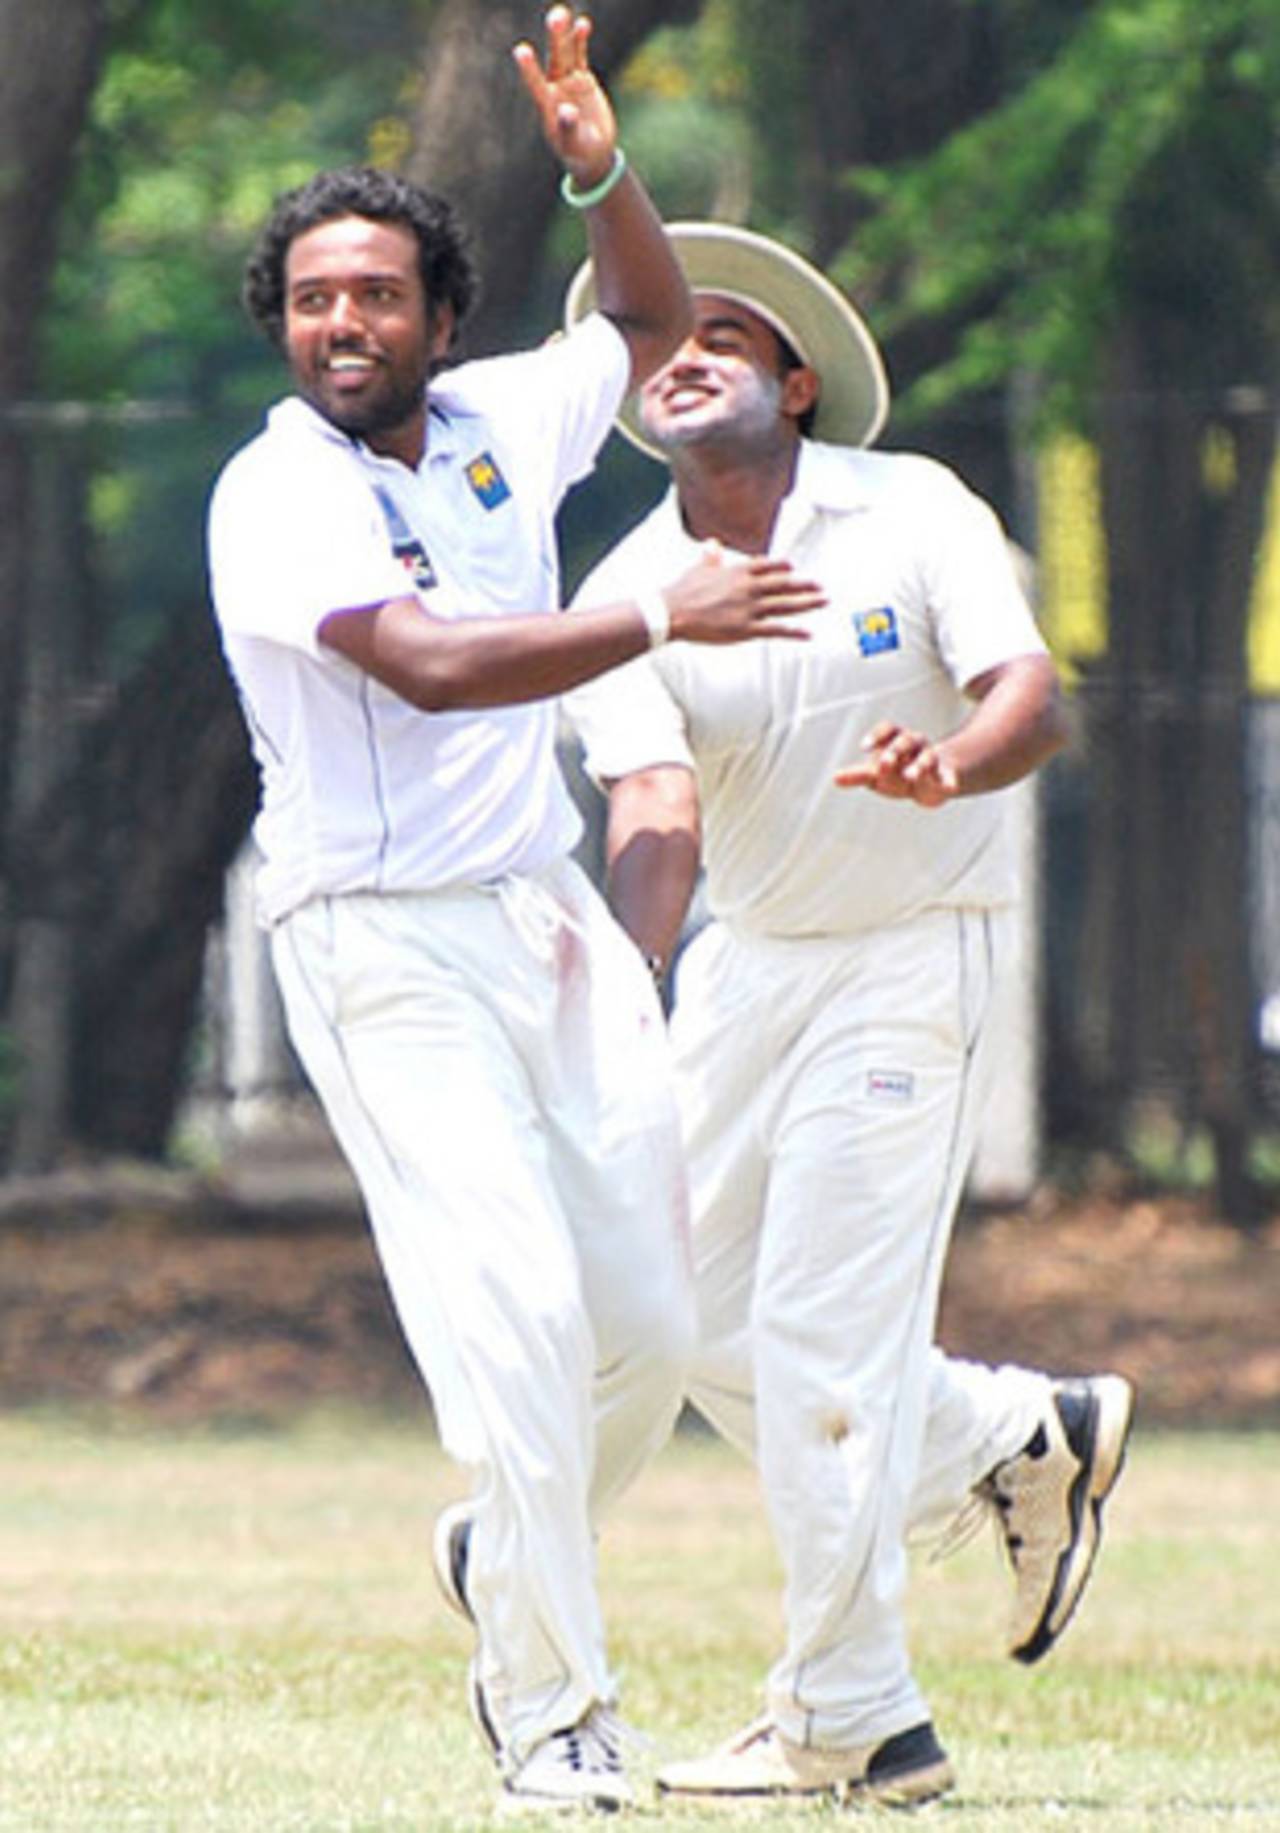 Malinga Bandara was at his best for Basnahira South, finishing with match figures of 9 for 115&nbsp;&nbsp;&bull;&nbsp;&nbsp;ESPNcricinfo Ltd